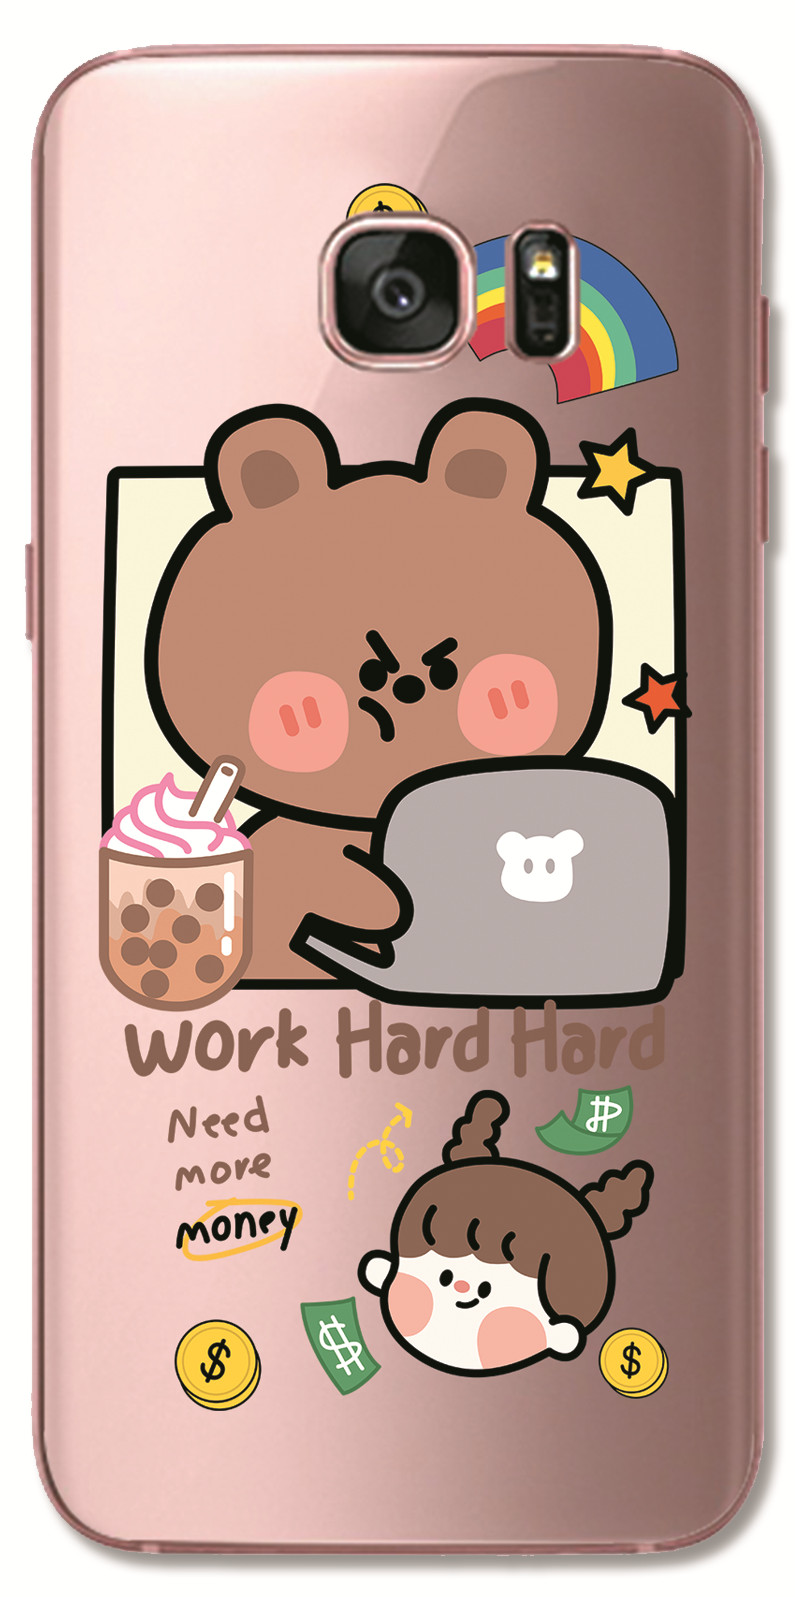 Samsung Galaxy S8 Plus / Note 4 5 3 2 N7100 N9000 INS Cute Cartoon Work hard Brown bear Clear Soft Silicone TPU Phone Casing Lovely label Graffiti Case Back Cover Couple